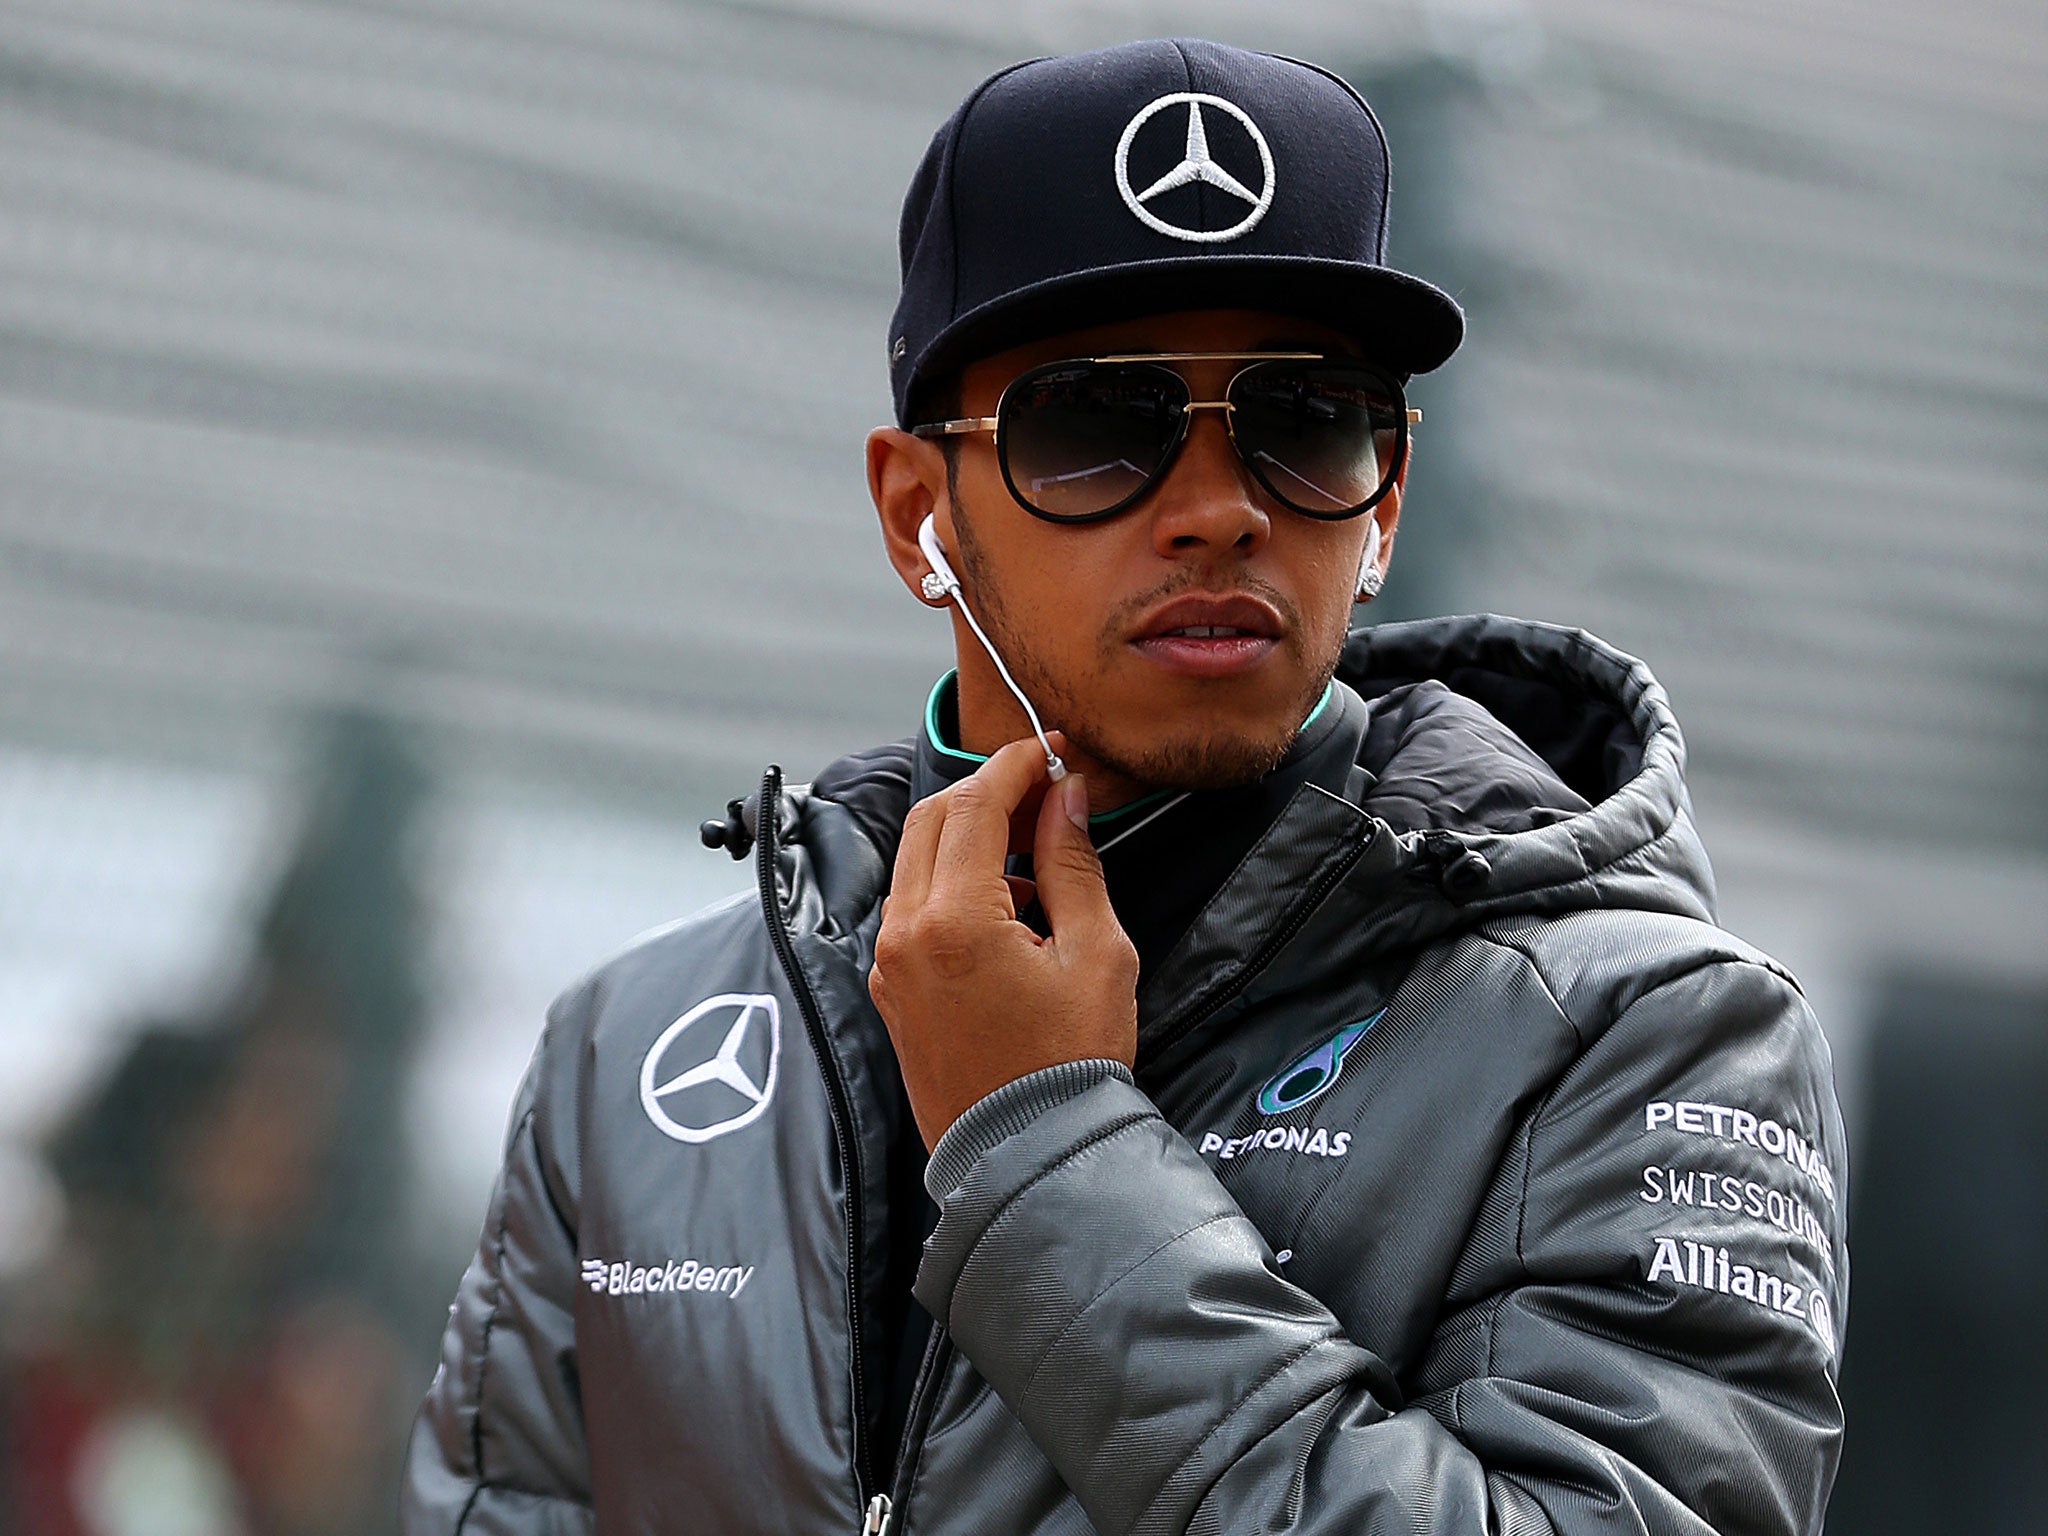 Lewis Hamilton says he no longer knows whether to trust Mercedes team mate Nico Rosberg on the track after they collided at Sunday's Belgian Grand Prix but has ruled out retaliation.